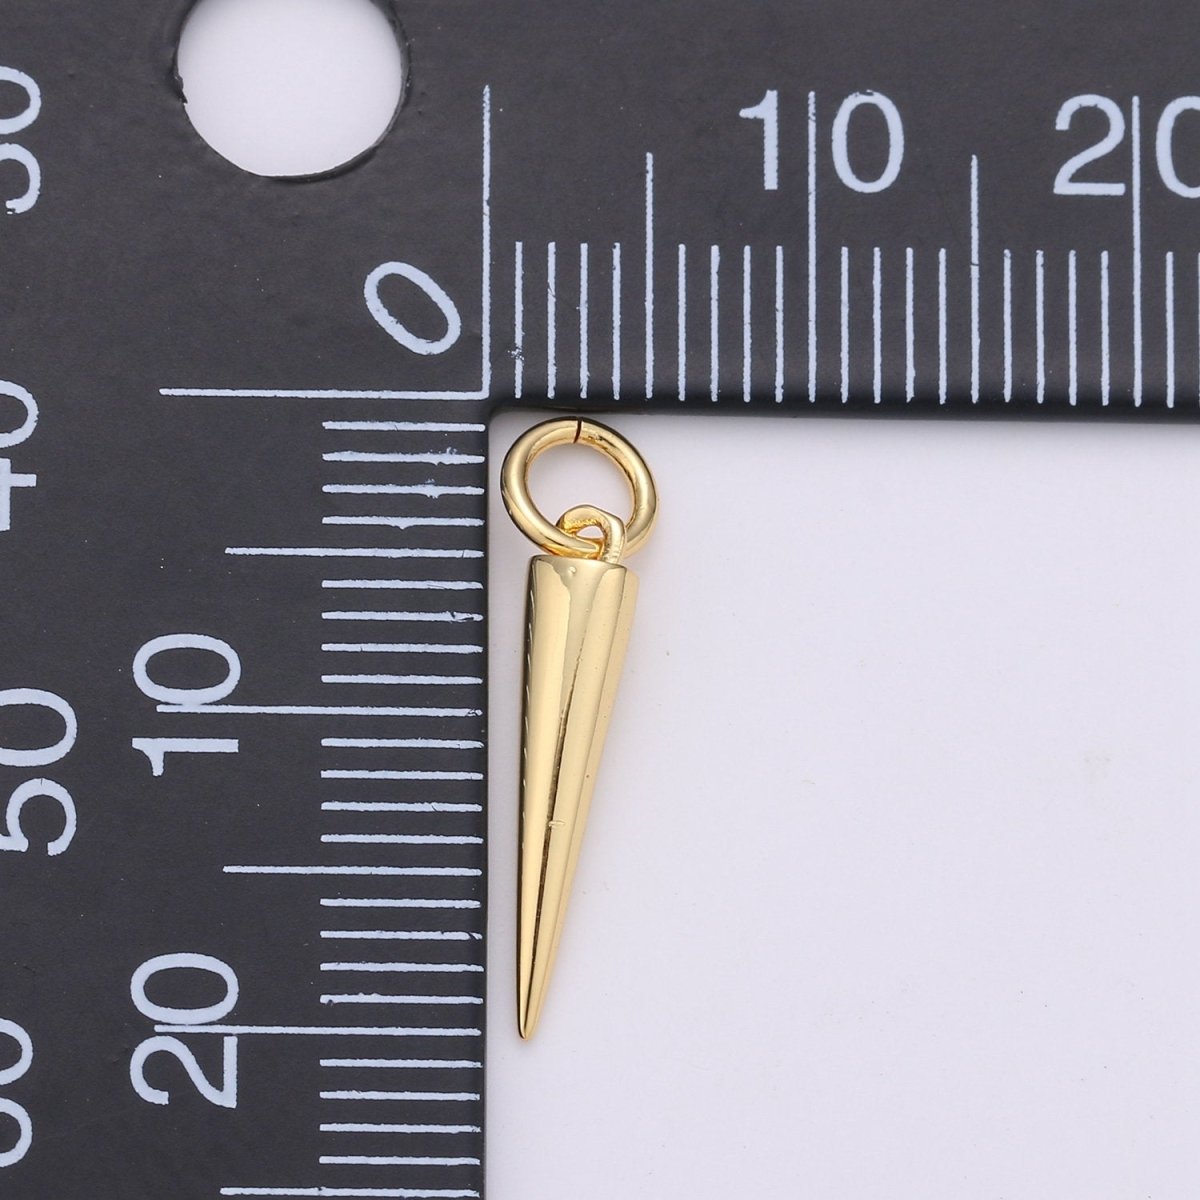 24k Gold Filled Dainty Gold Spike Charms Drop Pendulum Pendant Stud Charm Minimalist Jewelry Supply Findings for Necklace Earring Components E-254 E-255 - DLUXCA